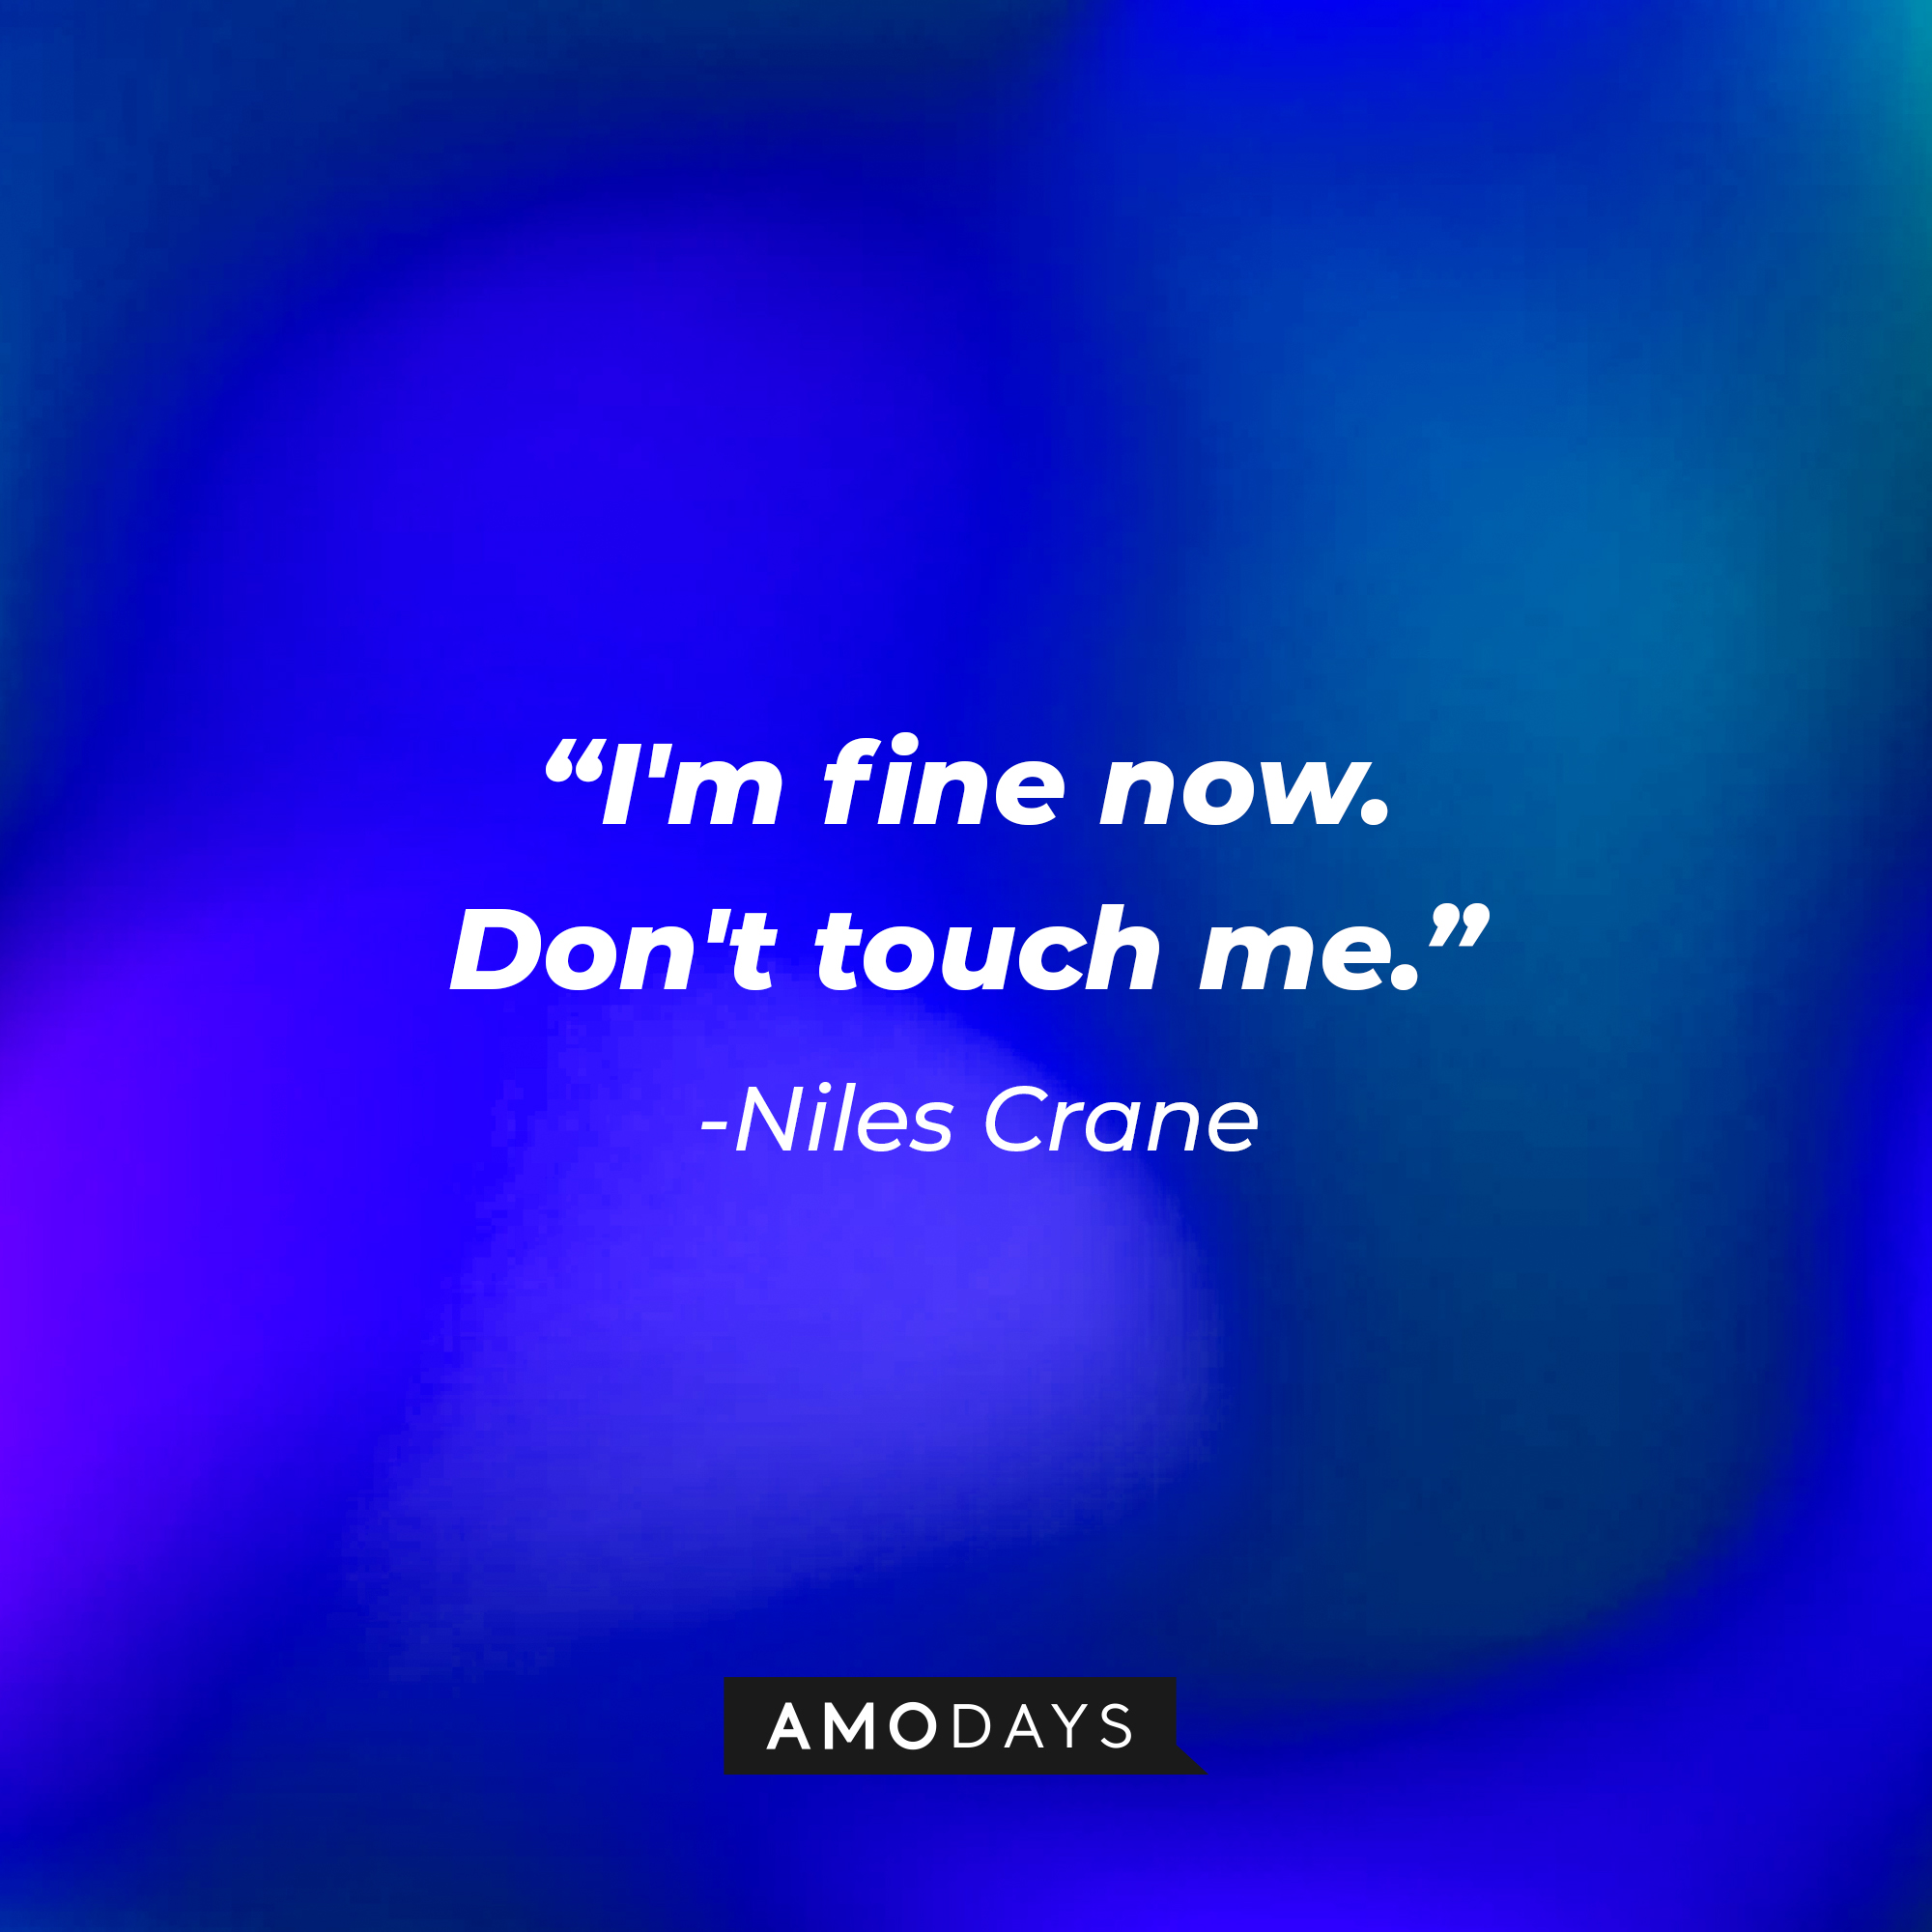 Niles Crane’s quote: "I'm fine now. Don't touch me." | Source: AmoDays